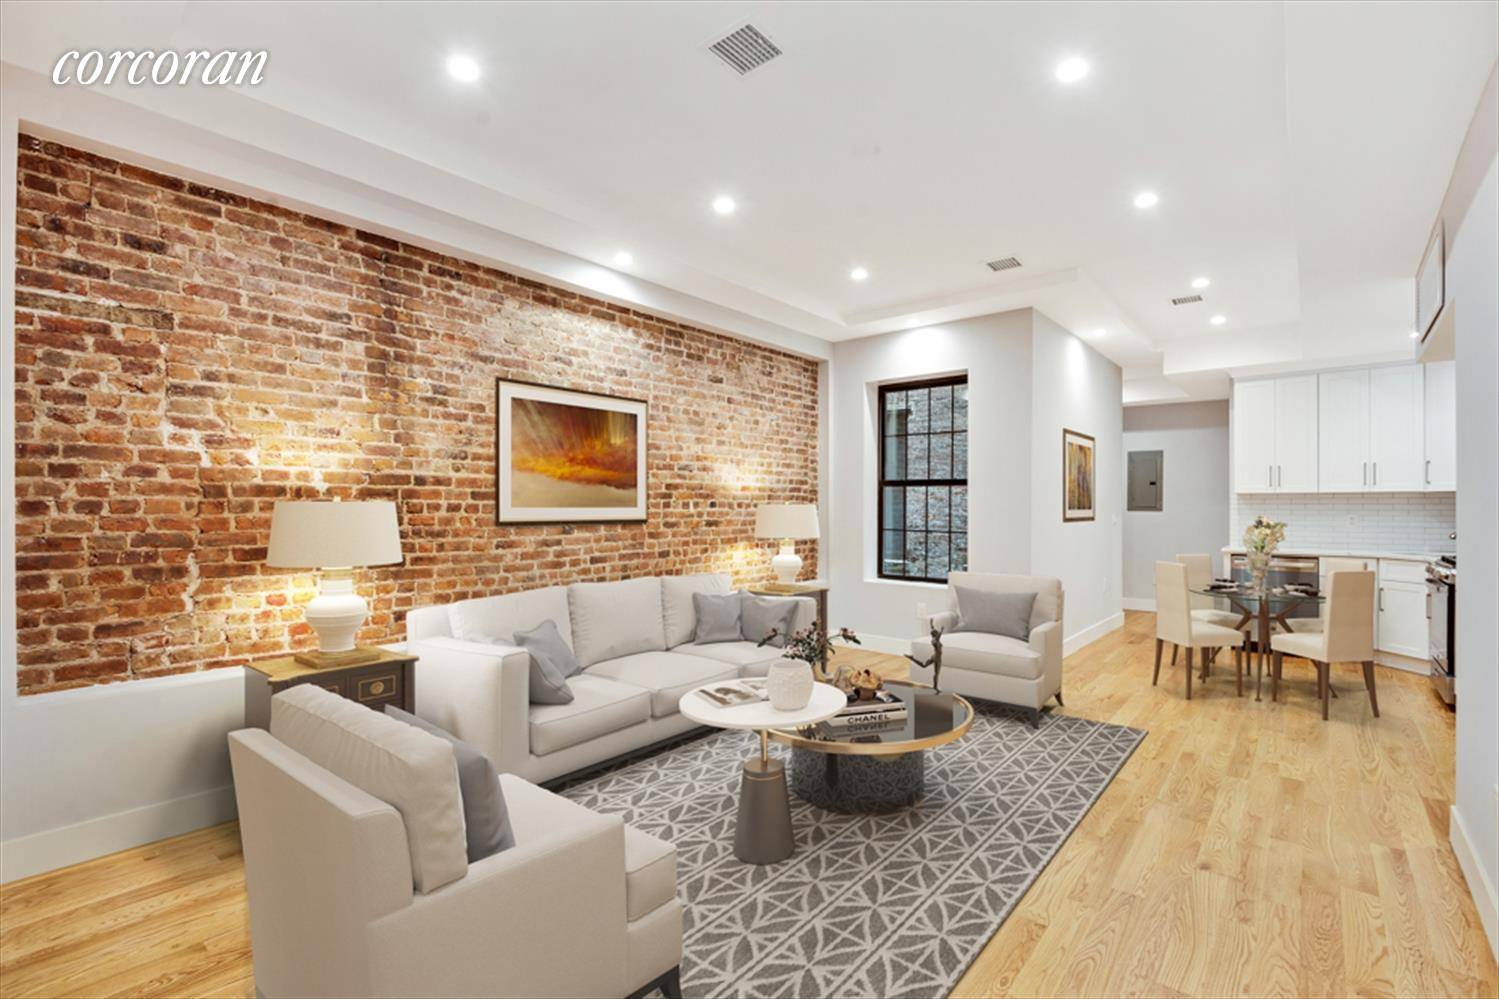 Welcome to 68 Herkimer Street ; a meticulously gut renovated brownstone featuring four full floor residences in a prime Bedford Stuyvesant location between highly coveted Bedford amp ; Nostrand Avenues.